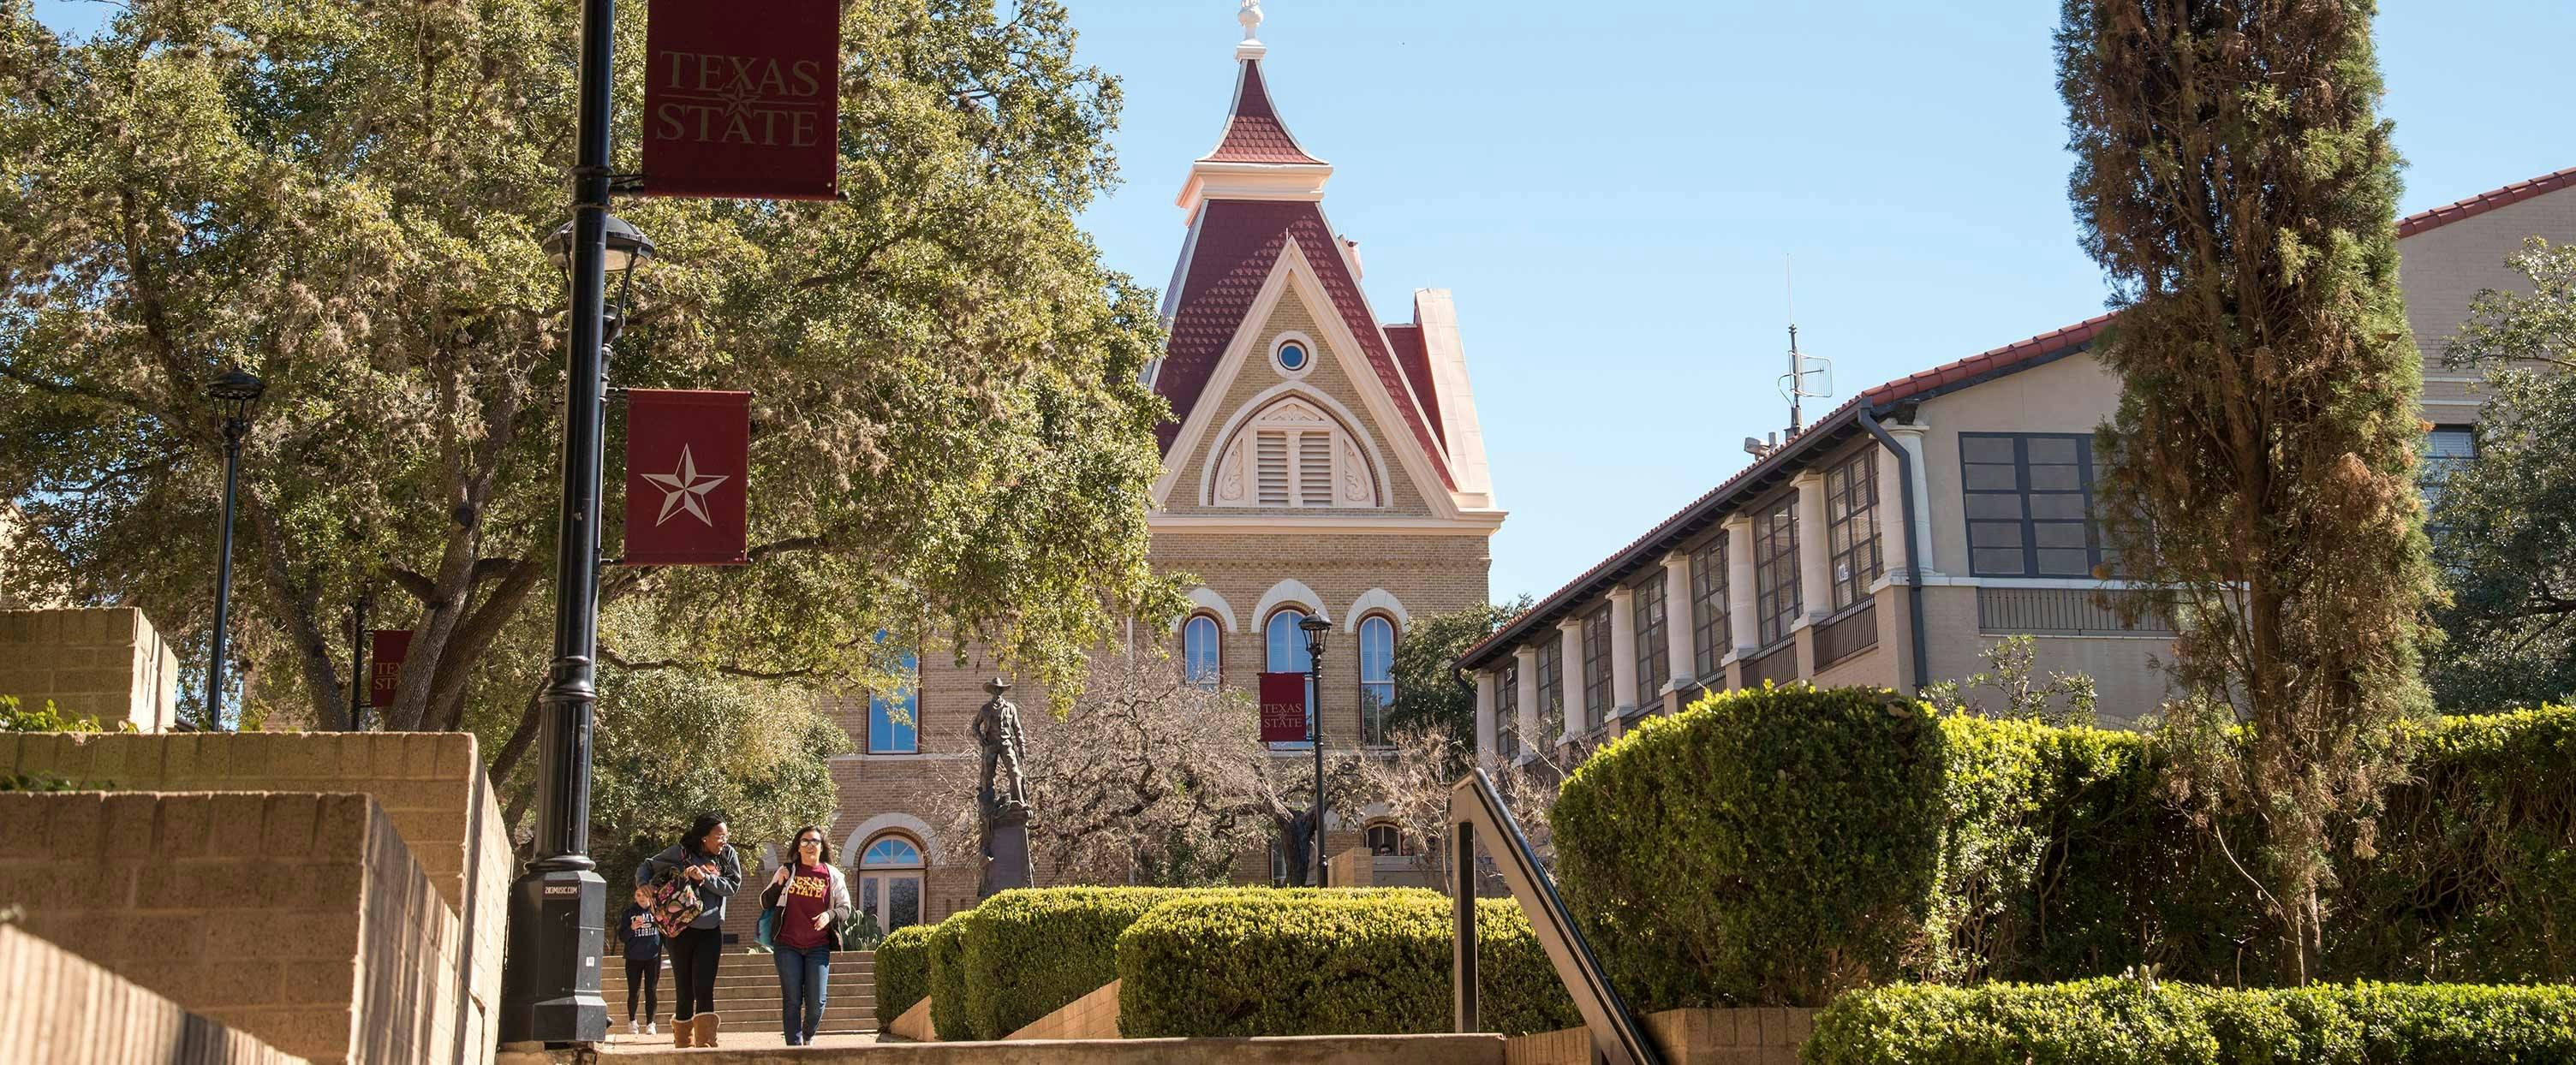 texas state university admissions essay requirements